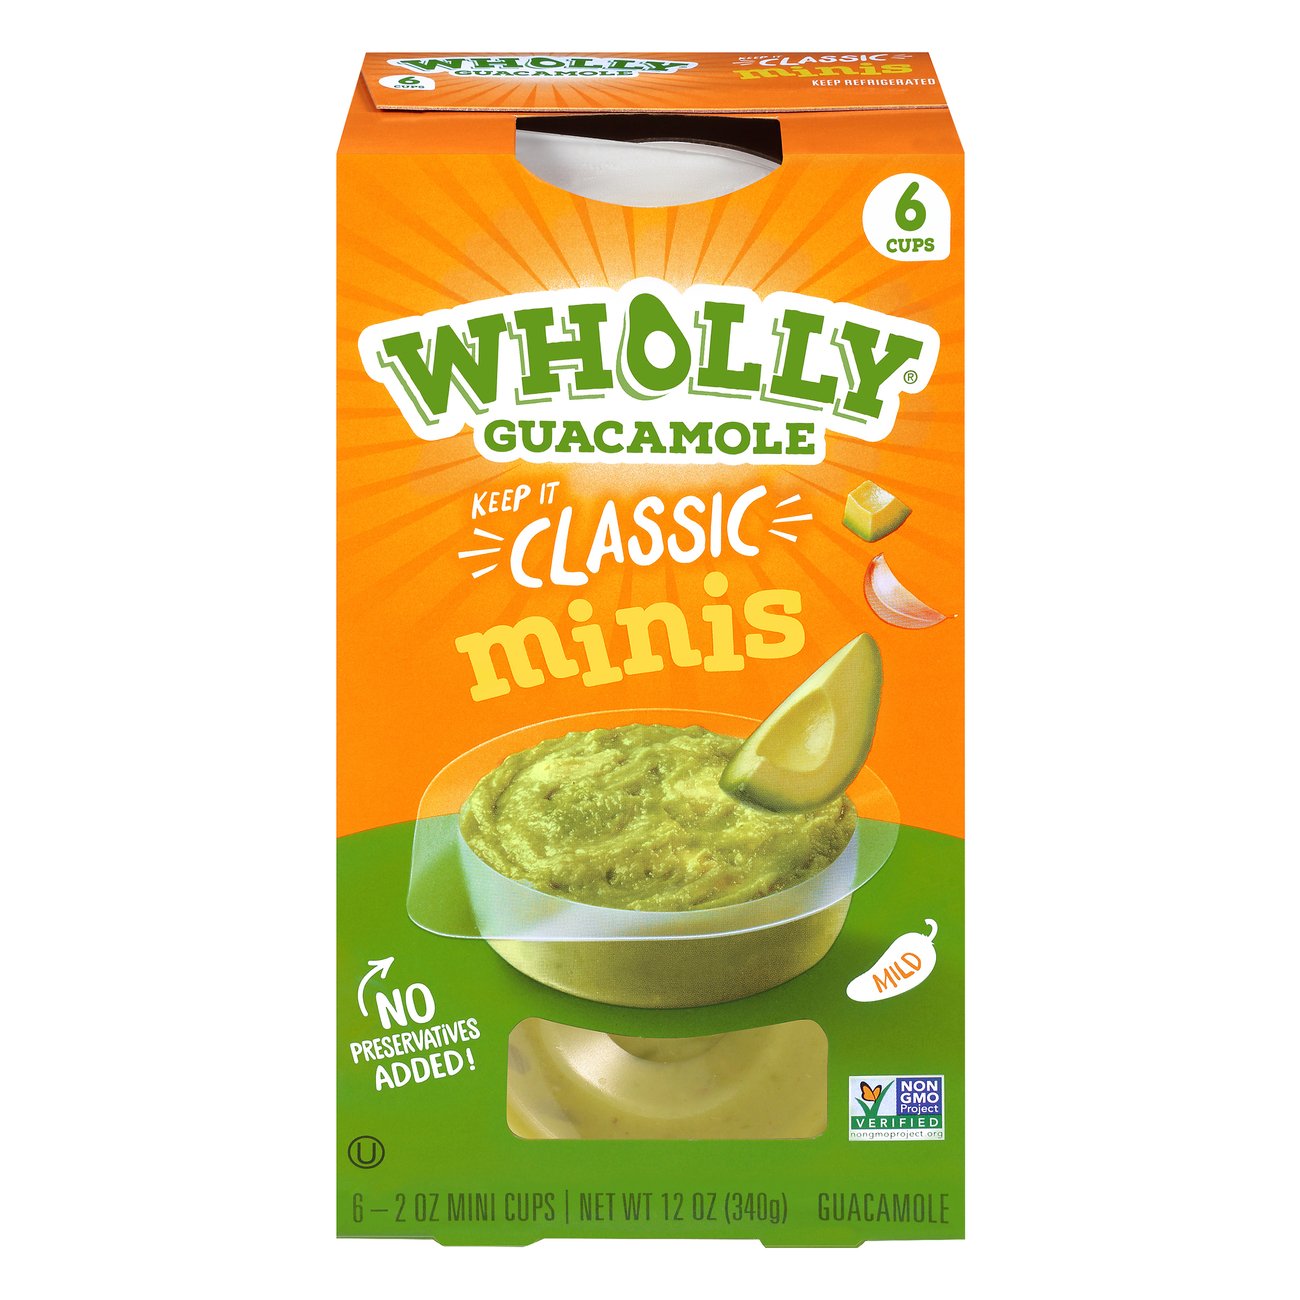 Mini Brands Food items  Food items, Wholly guacamole, Food